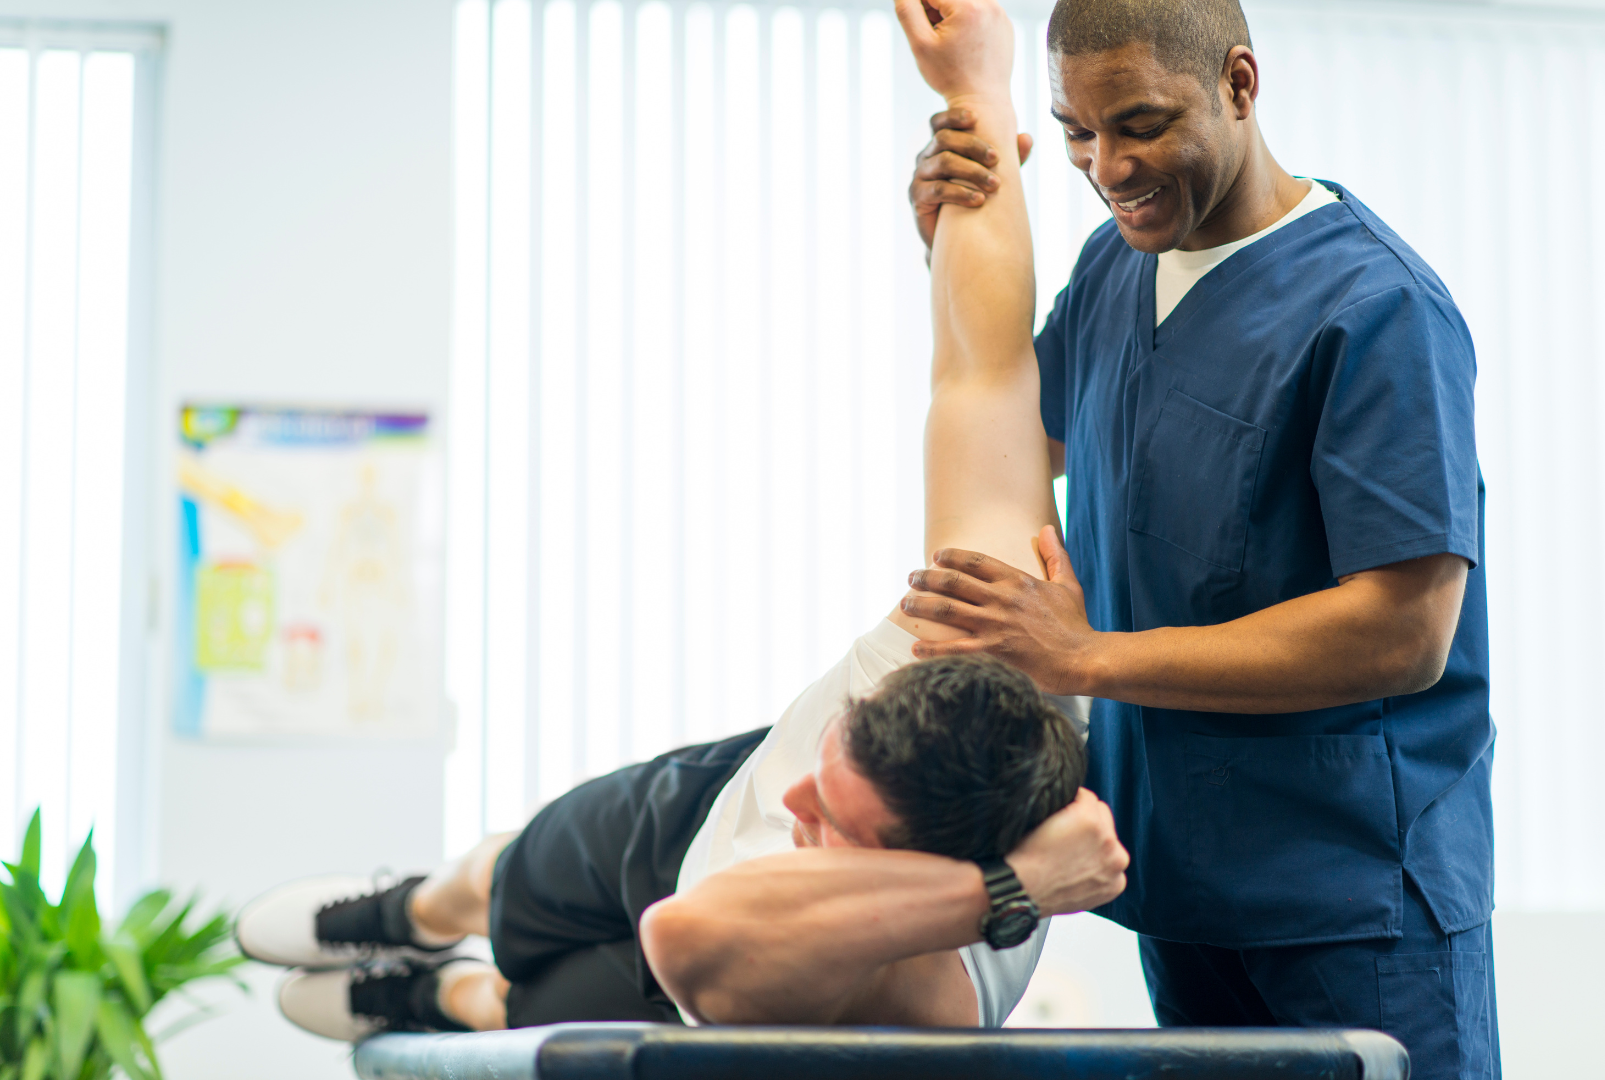 Direct Access for Physical Therapy in North Carolina - How Does It Work?